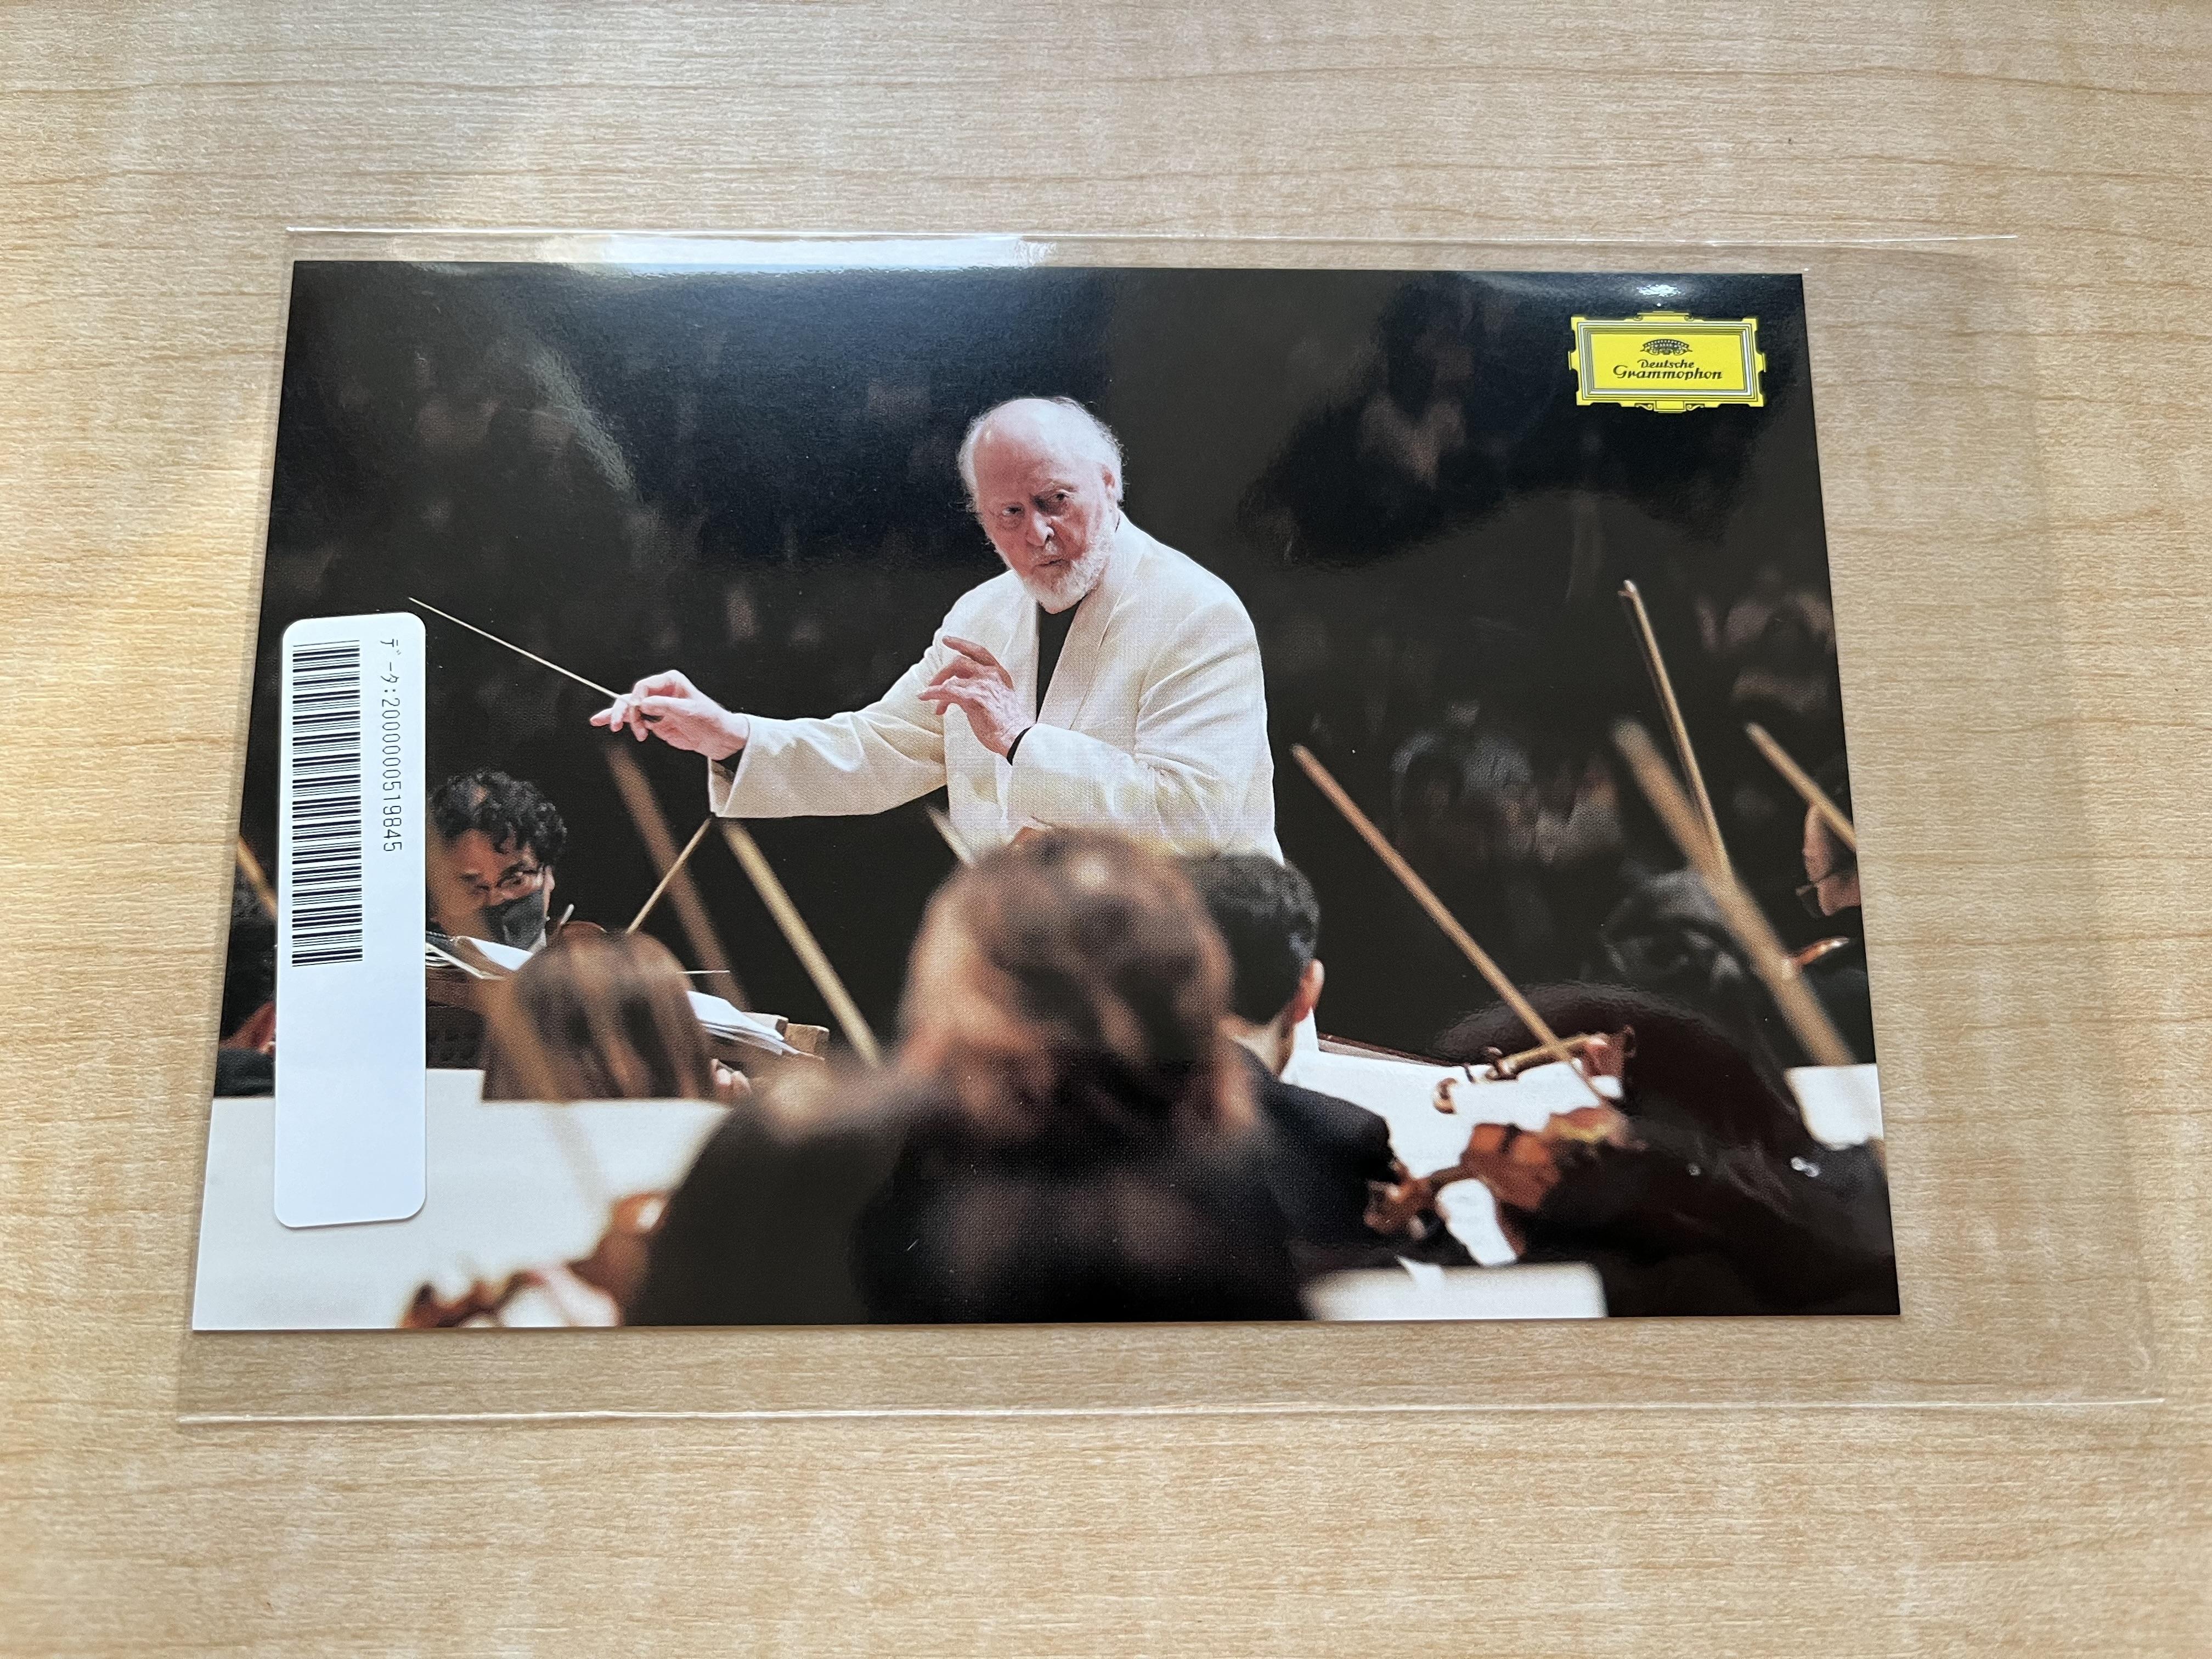 John Williams In Tokyo - New live concert album coming May 3rd